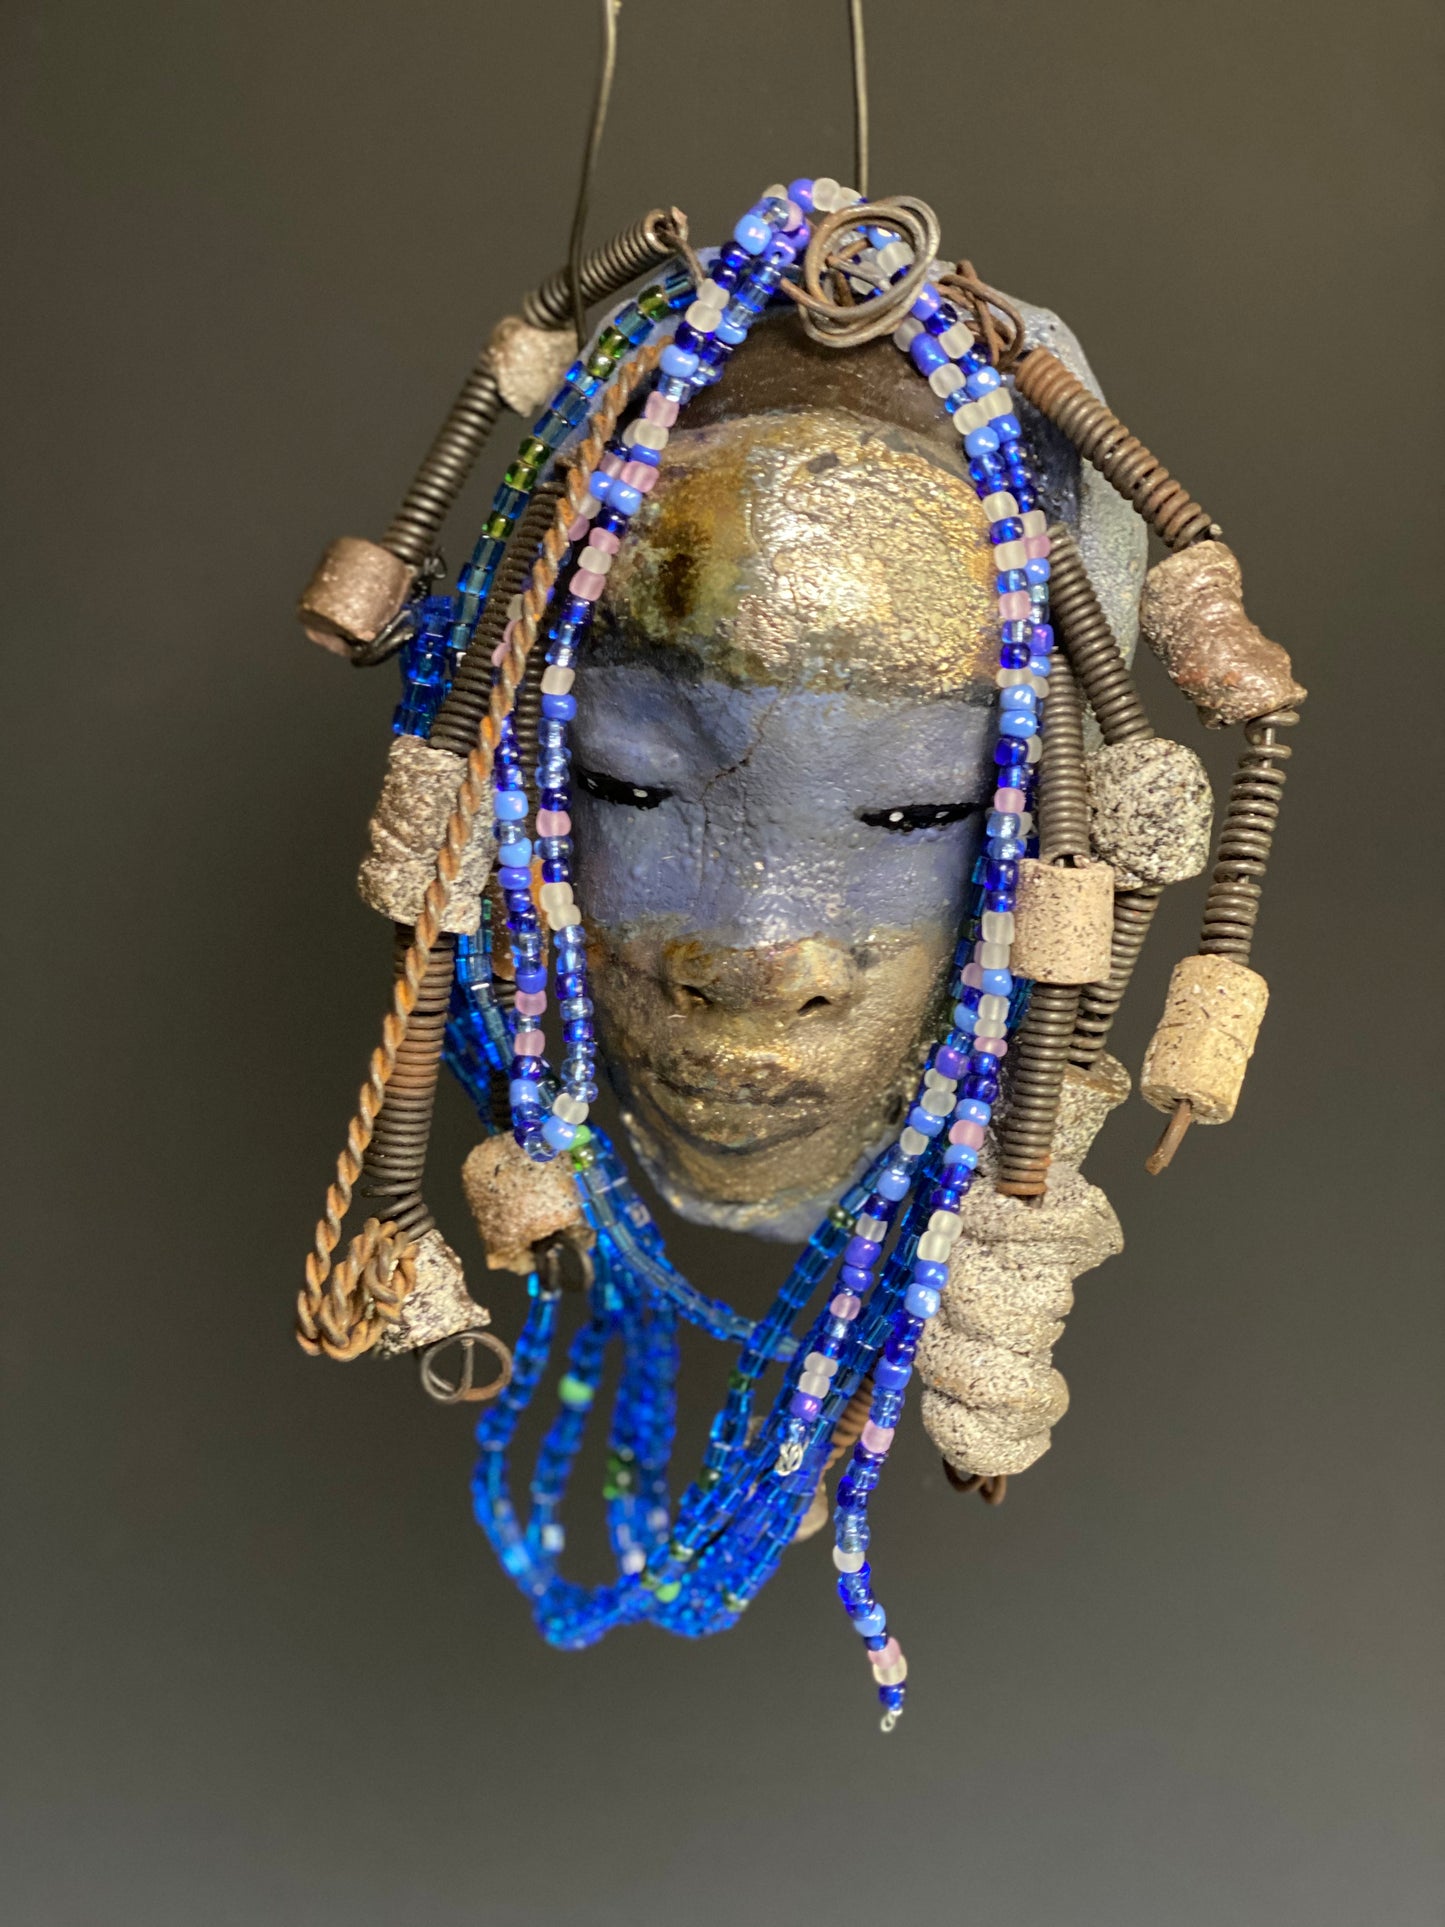  Meet Randi! I started making art soon after seeing authentic African artwork at the Smithsonian Museum of African Art. I was in total awe. Randi was inspired by my visit there.   Randi has a two tone complexion of golden silver and blue. She is 8" x 6" and weighs 14 ozs. Randi has over 10 raku beads. She has over 200 of multi shade of blue and white mini beads. Randi has over 10 feet of  coiled copper and 16 gauge wire hair.